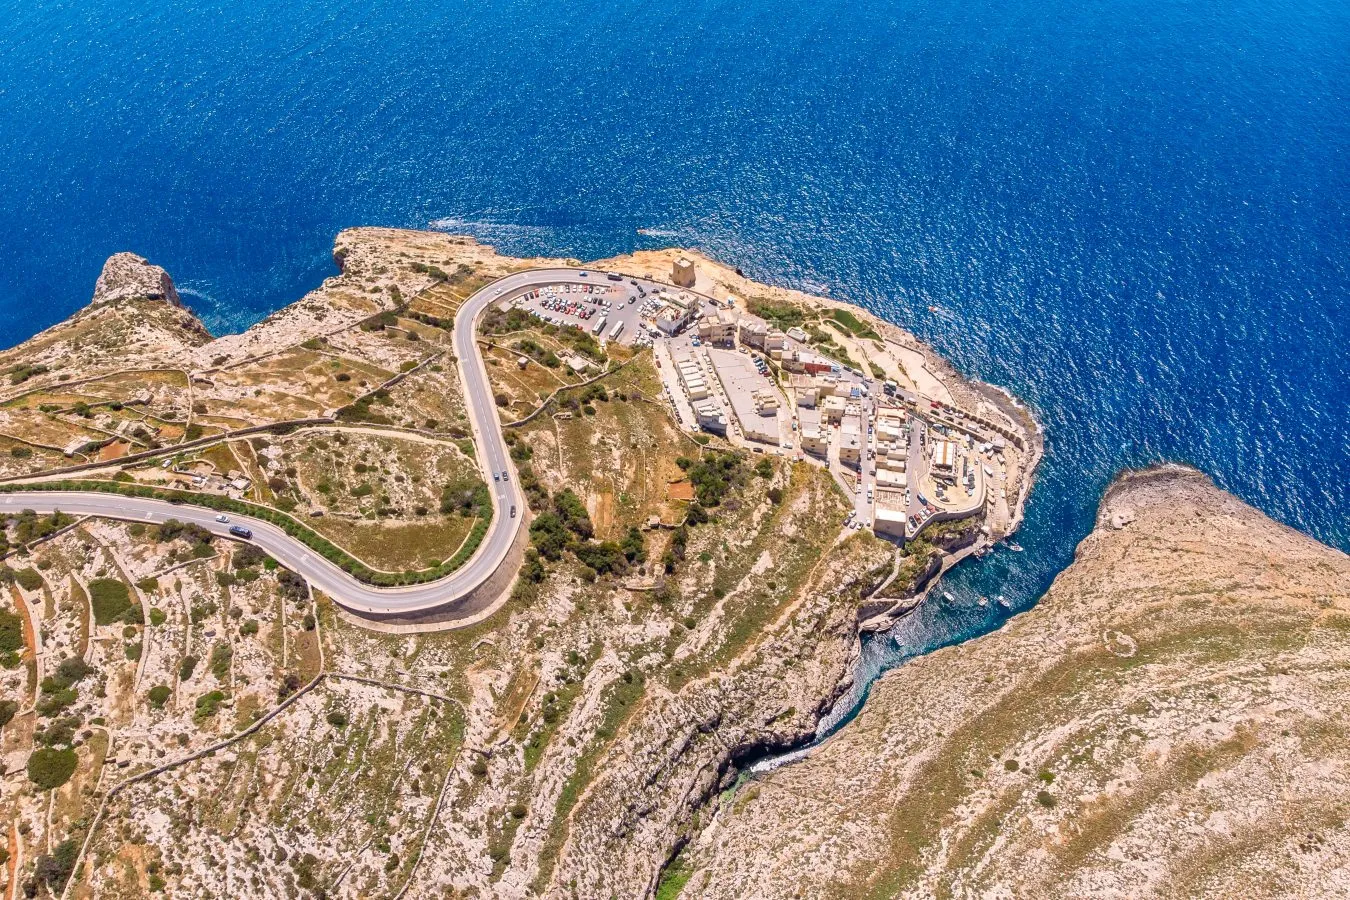 aerial view of blue grotto area with road approaching it visible on the left